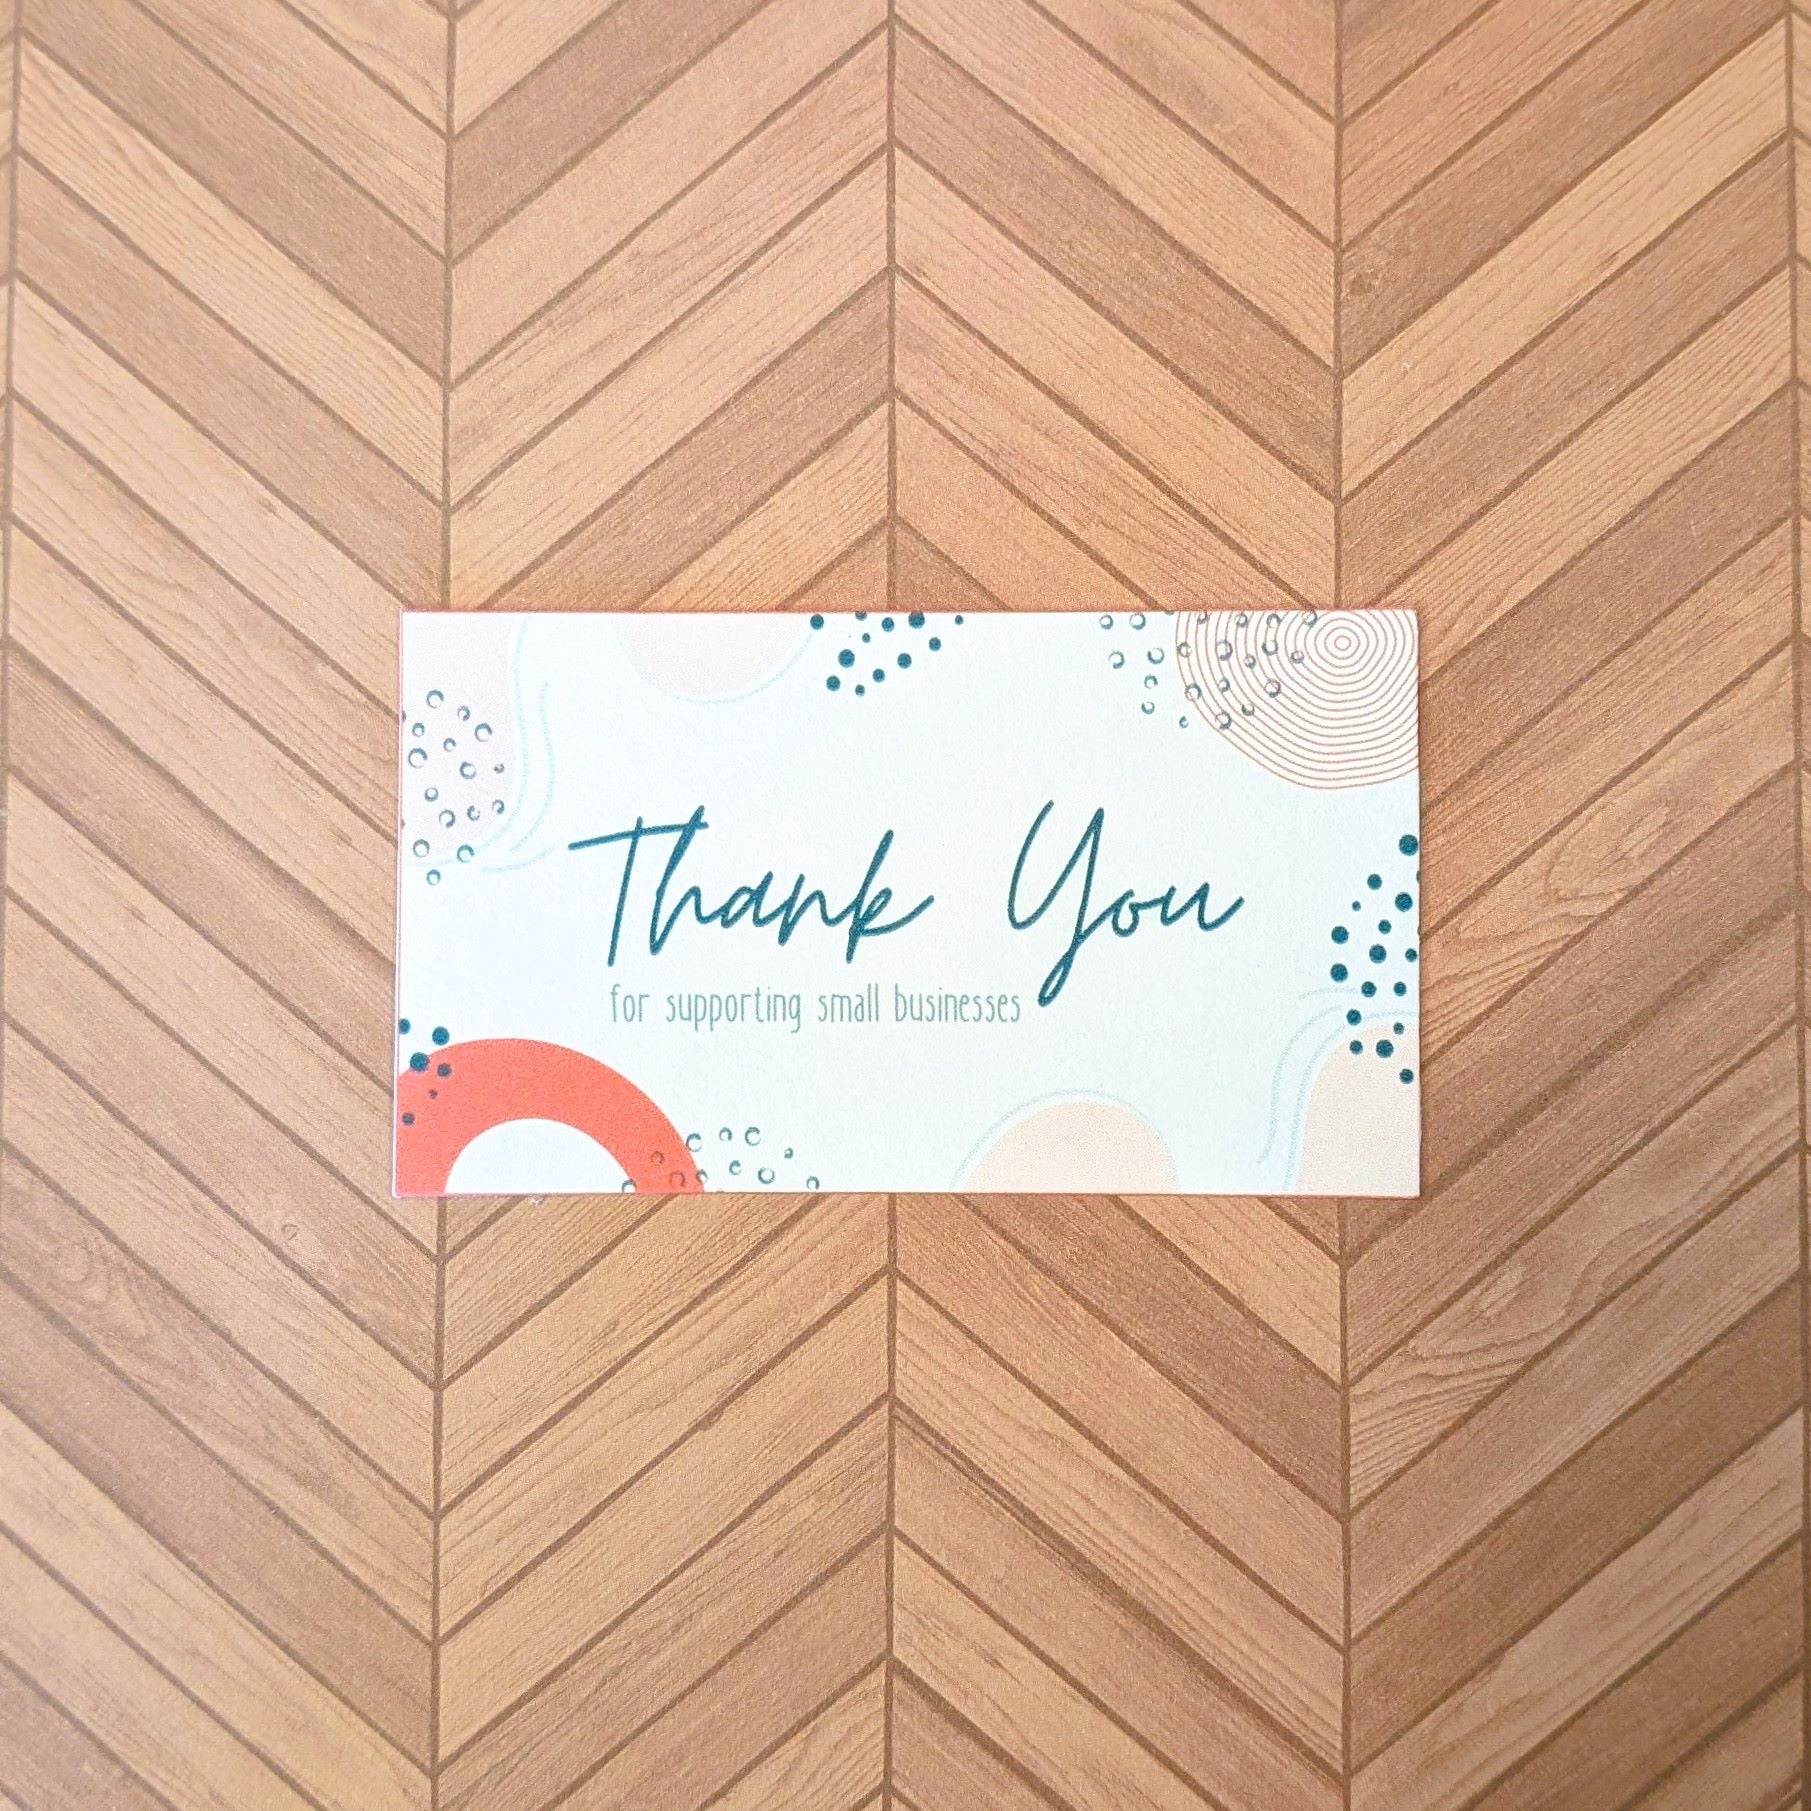 Thank You Cards, 24ct - Perfect for Small Businesses - Business Card Size (3.5"x2") - 31 Rubies Designs